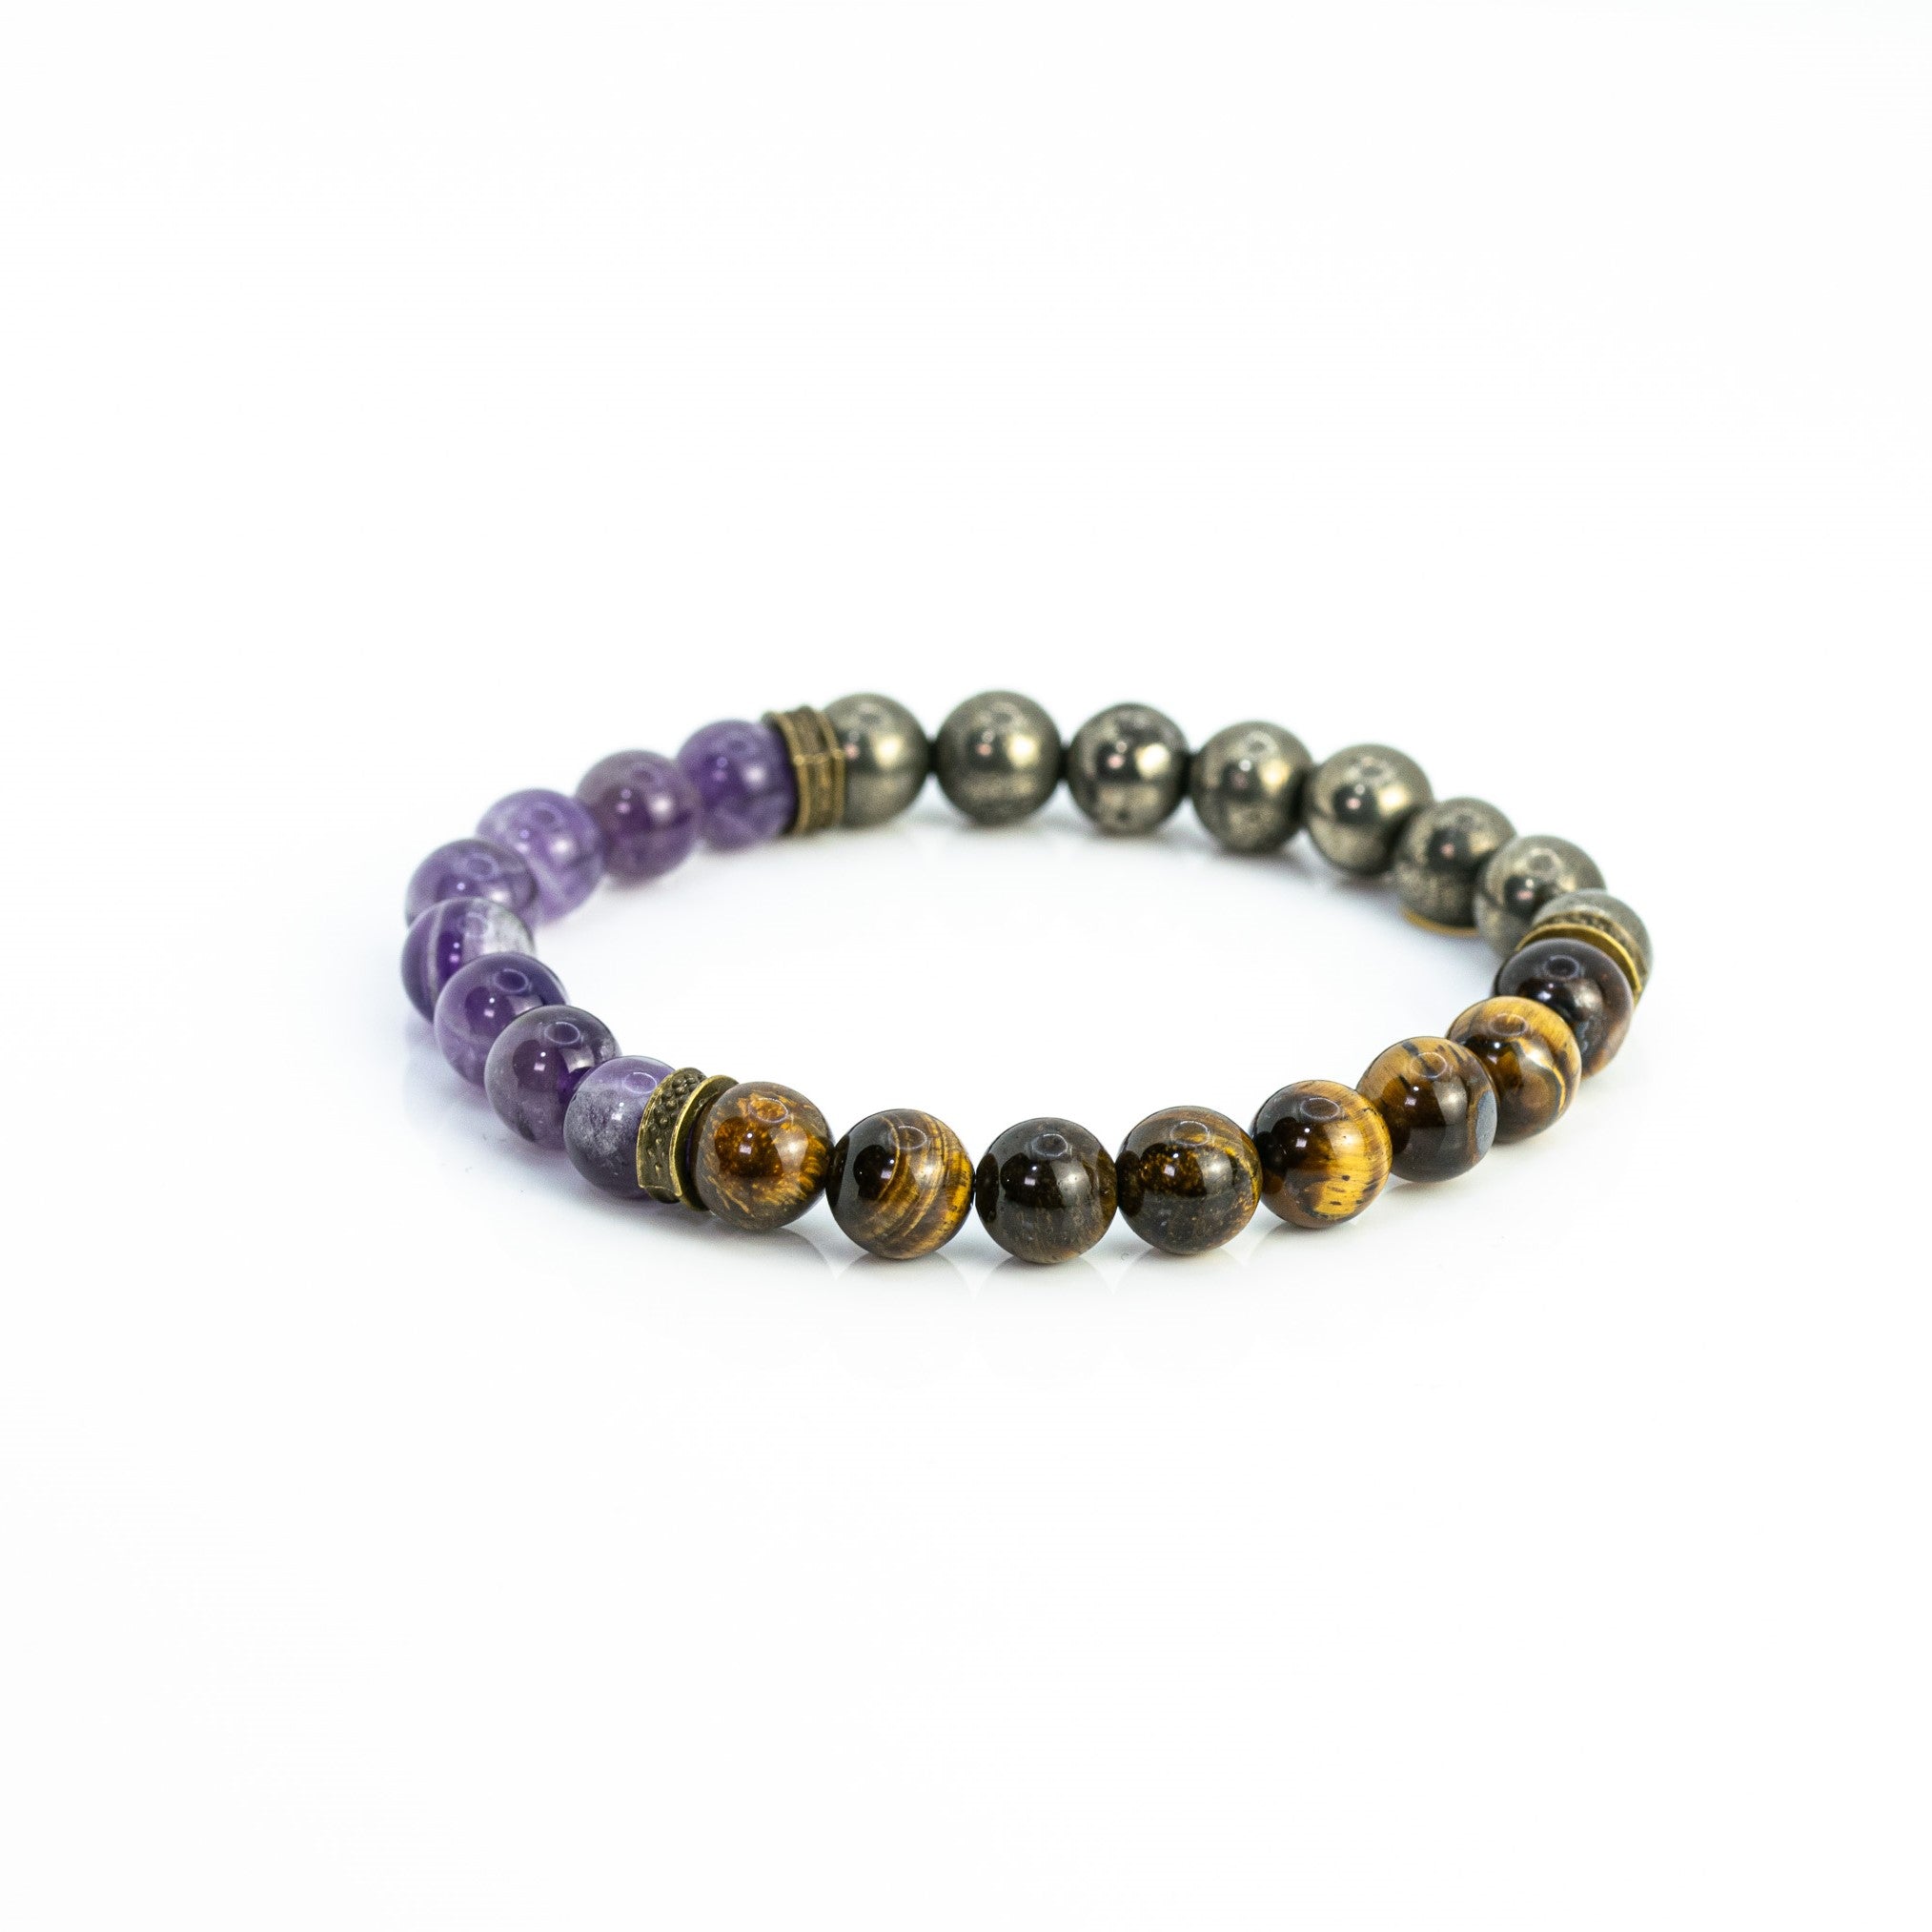 Amethyst Tiger Eye and Pyrite Bracelet for focus, results, wealth & grounding